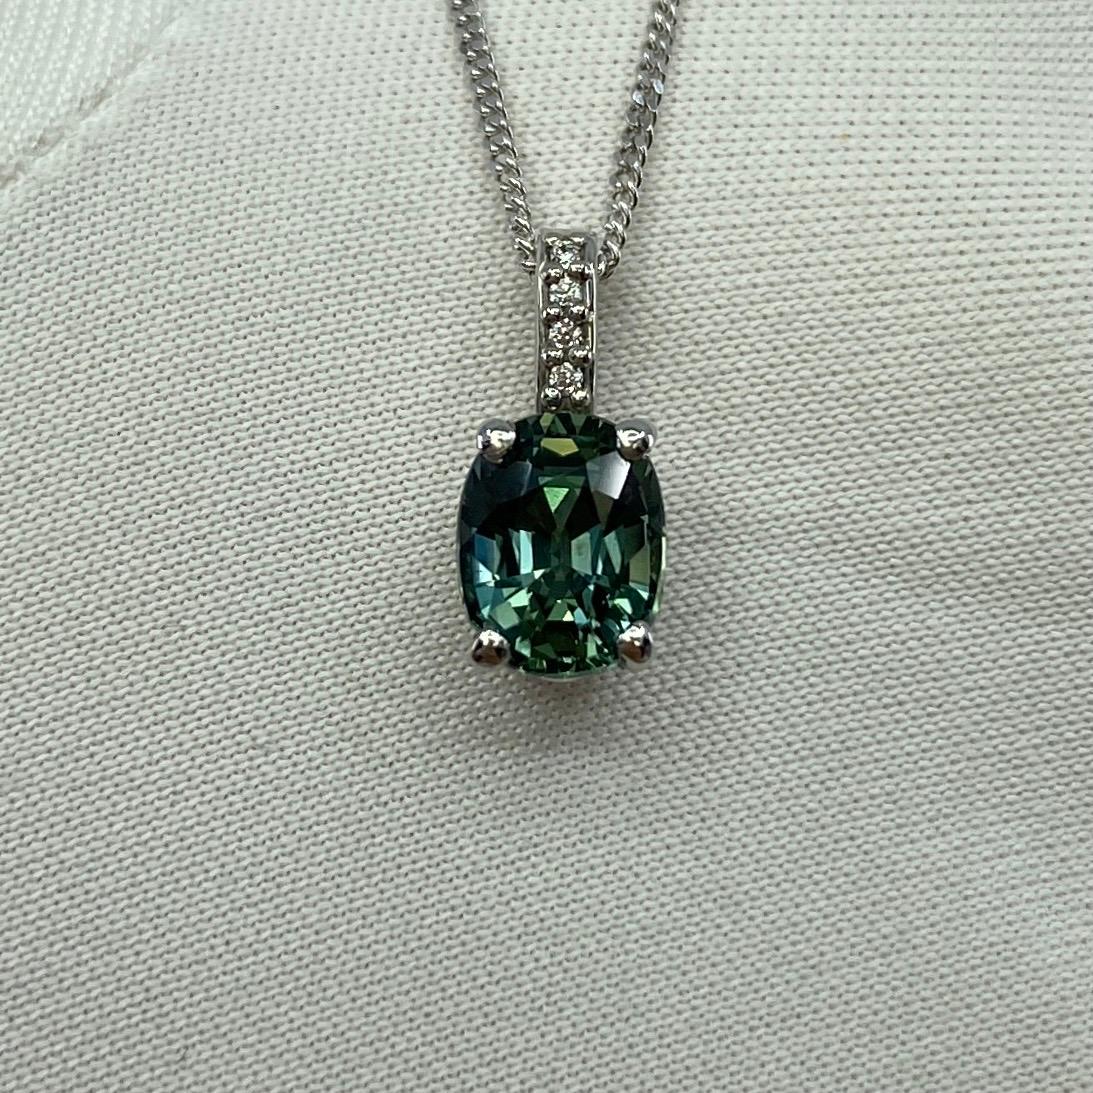 GIA Certified Untreated Green Blue Sapphire & Diamond Platinum Pendant Necklace.

Untreated 1.40 Carat oval cut sapphire with a stunning vivid blue-green colour and excellent clarity. A very clean stone.

This sapphire also has an excellent oval cut